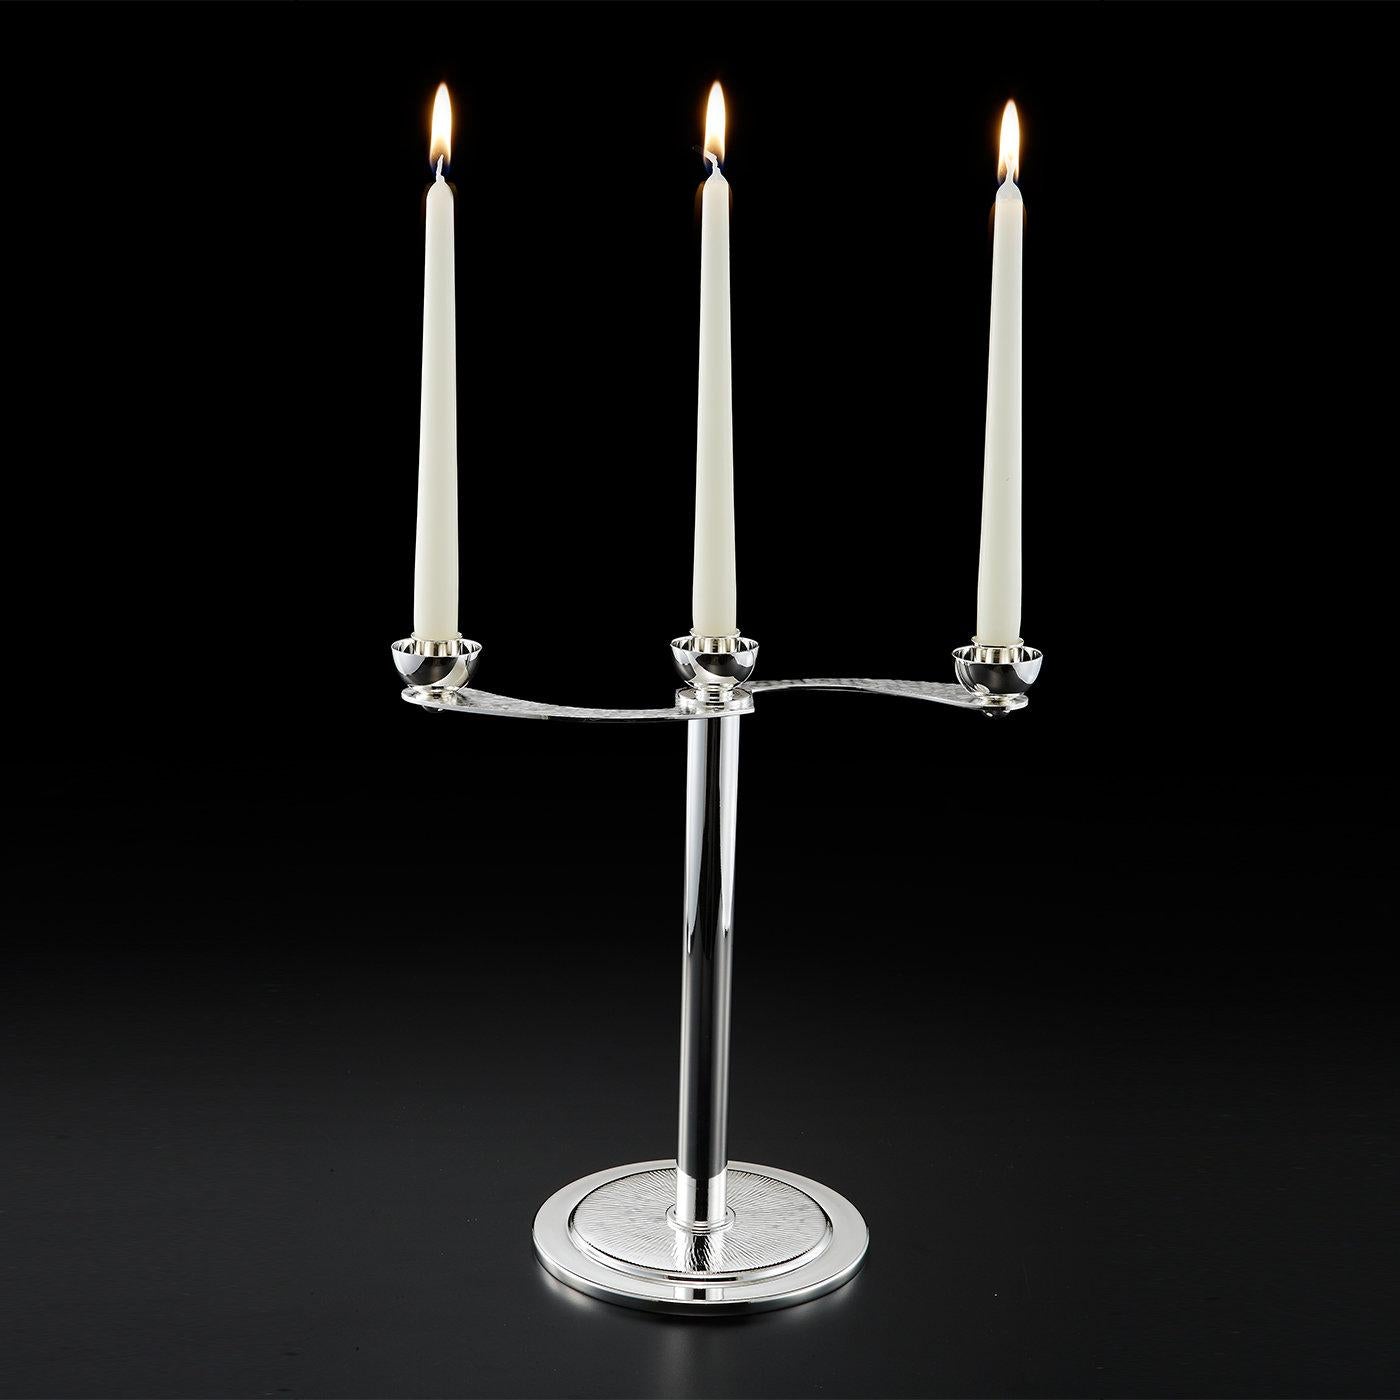 The beautiful candelabra holds three candles and is elegantly constructed in a silver-plated alloy. The candelabra can be separated into two pieces, with the top holding candles and the base becoming a vase. The arms of the candelabra are also